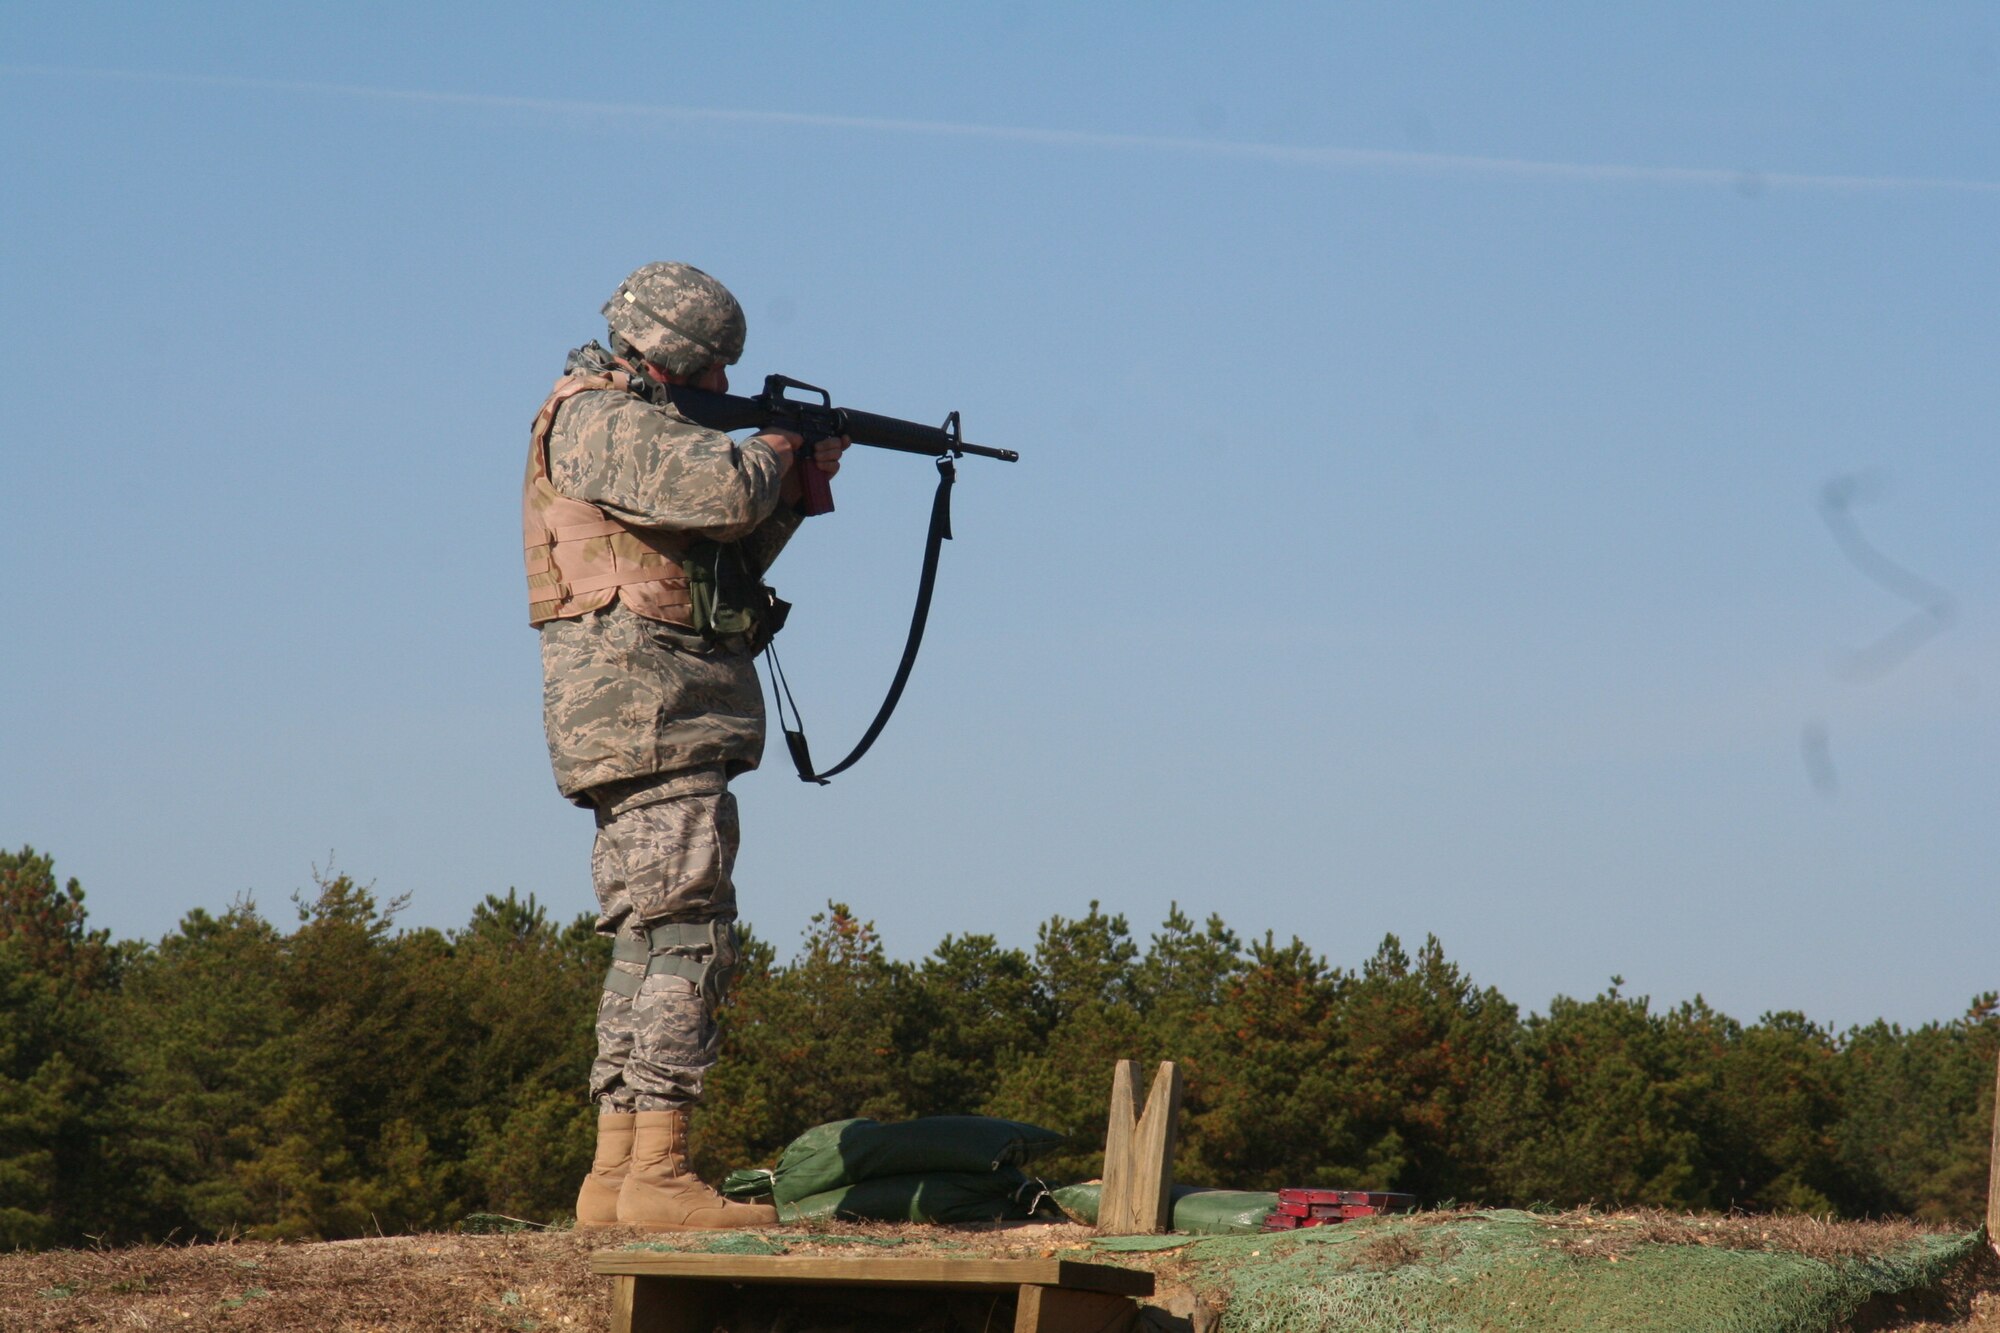 A student participates in the Advanced Marksmanship Class in the Combat Airman Skills Training Course at Joint Base McGuire-Dix-Lakehurst, N.J., on Nov. 7, 2009.  The course, taught by the U.S. Air Force Expeditionary Center's 421st Combat Training Squadron, prepares Airmen for upcoming deployments. (U.S. Air Force Photo/Tech. Sgt. Scott T. Sturkol)